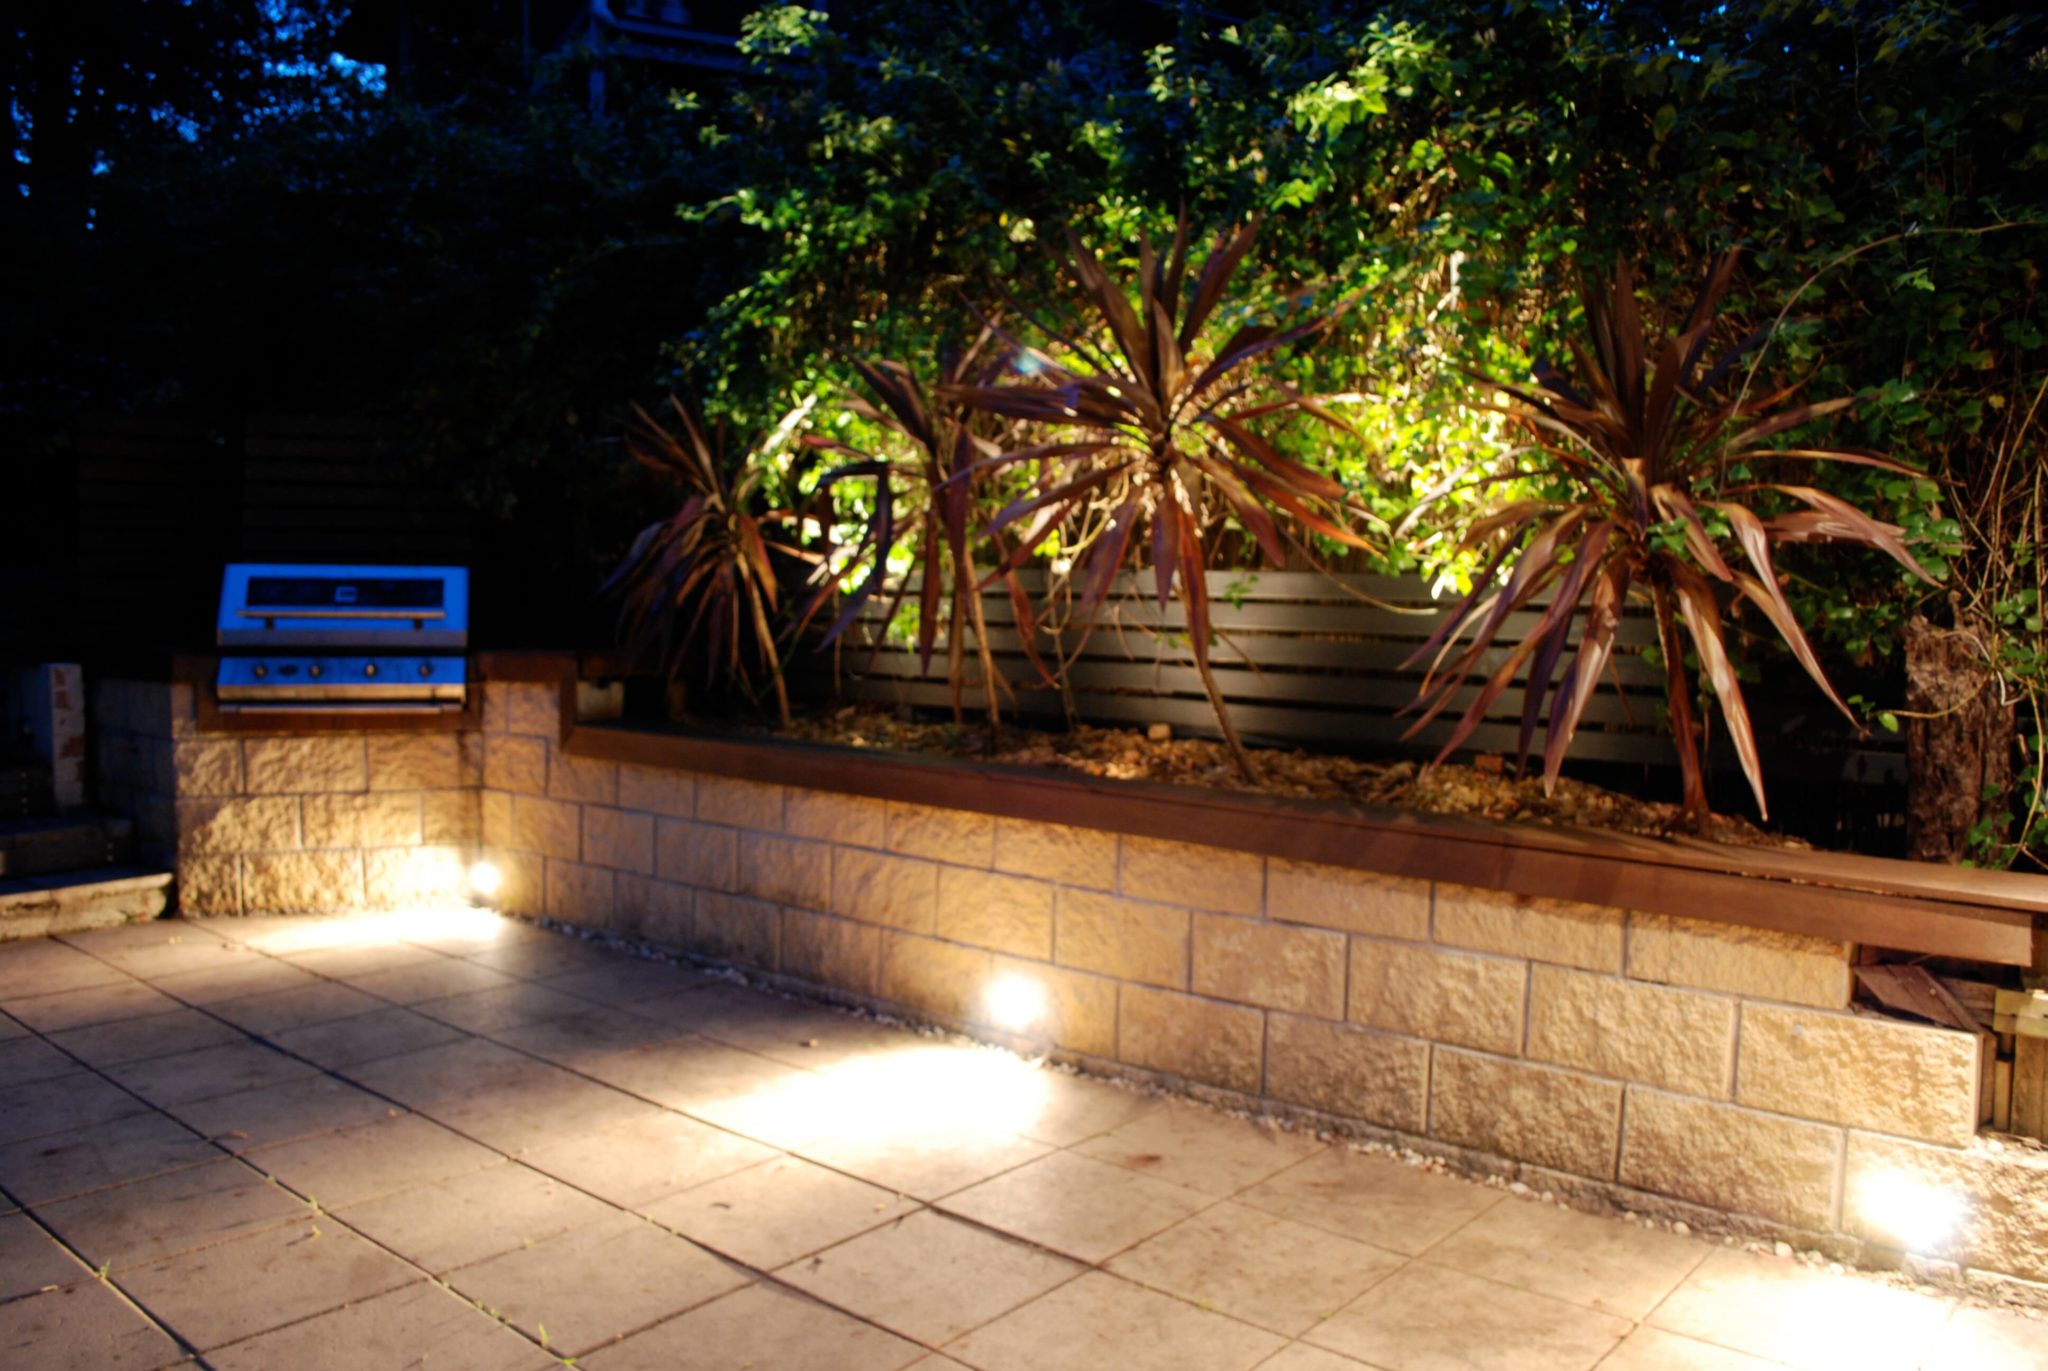 Lighting Winsome Innovative Outdoor Lighting Ideas For Your Garden From Best Ideas To Light Up Your Garden Sourcefhpcman.com Of Best Ideas To Light Up Your Garden